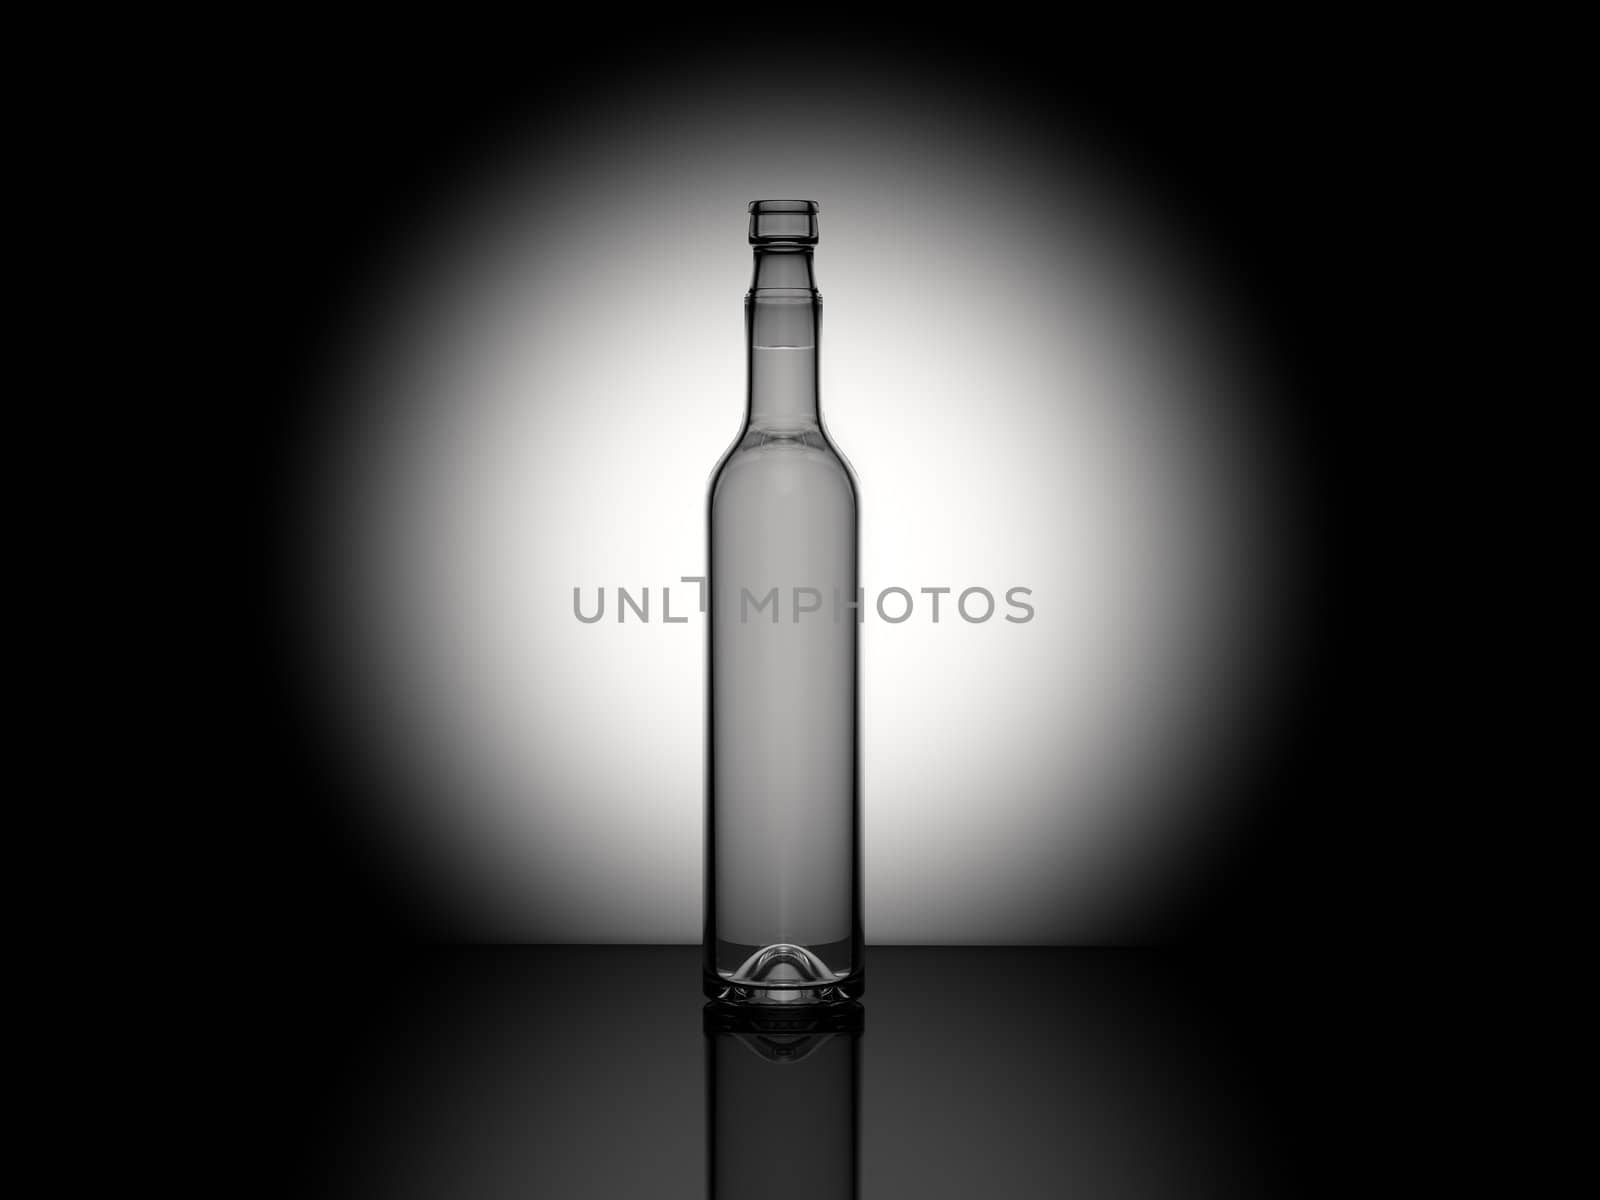 3d 700 ml glass bottle with some reflexion on the table and spot light in the back